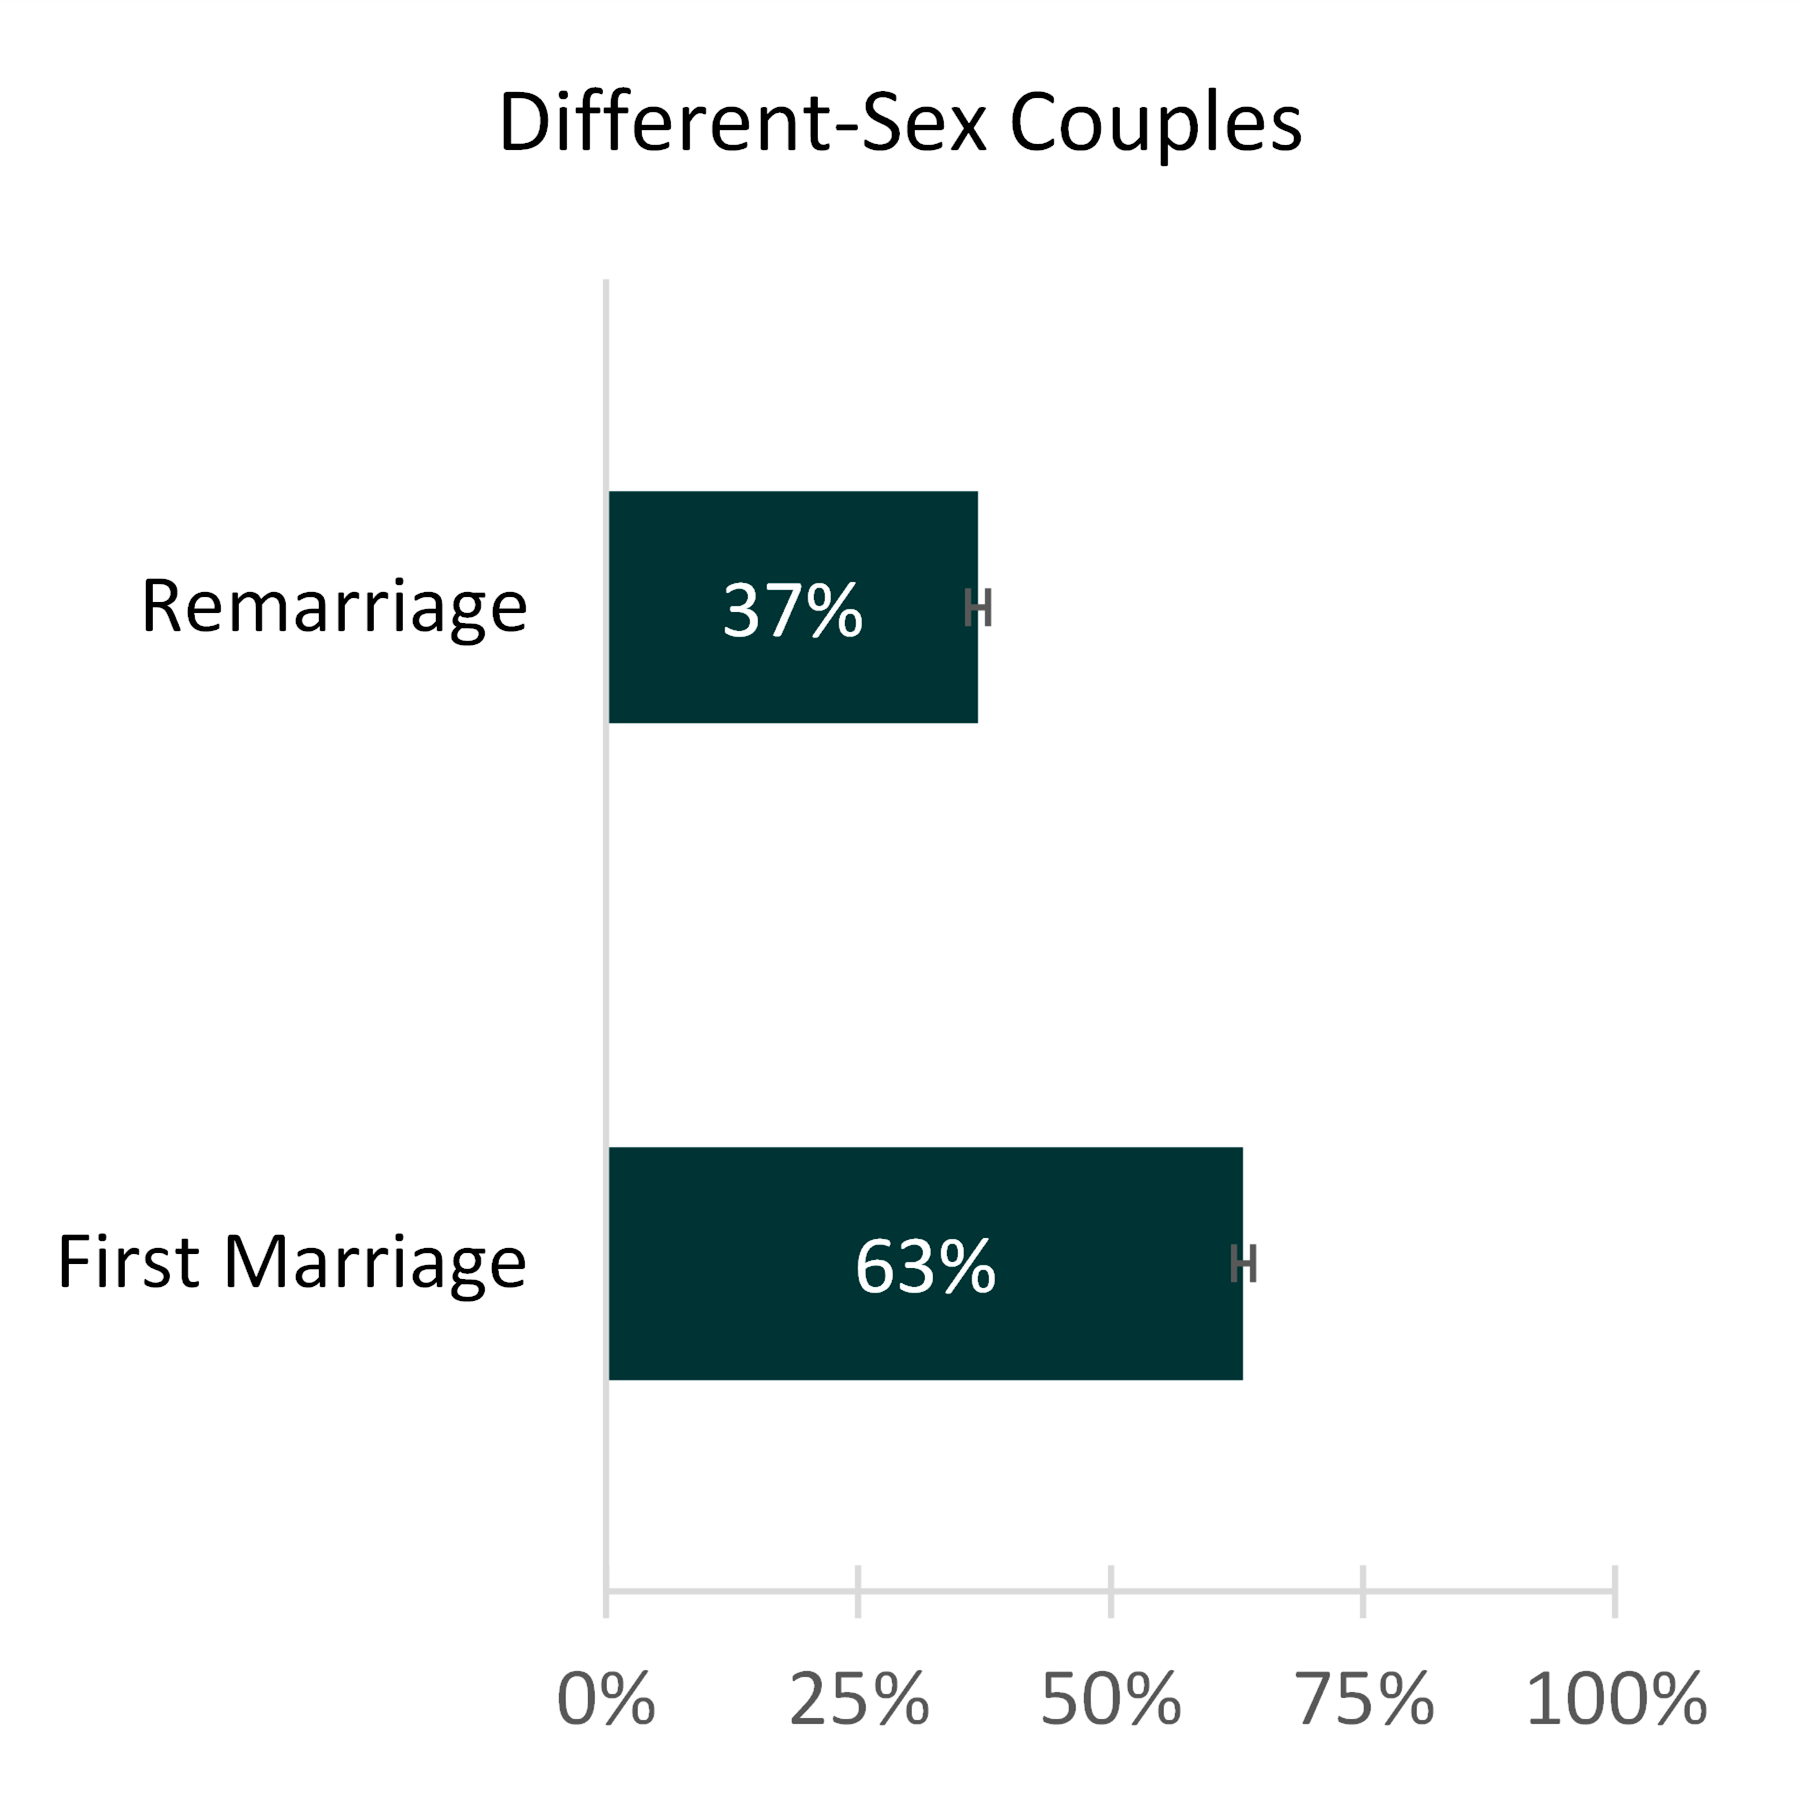 Graph showing Figure 2. First Marriage and Remarriage for Different-Sex Couples, 2019